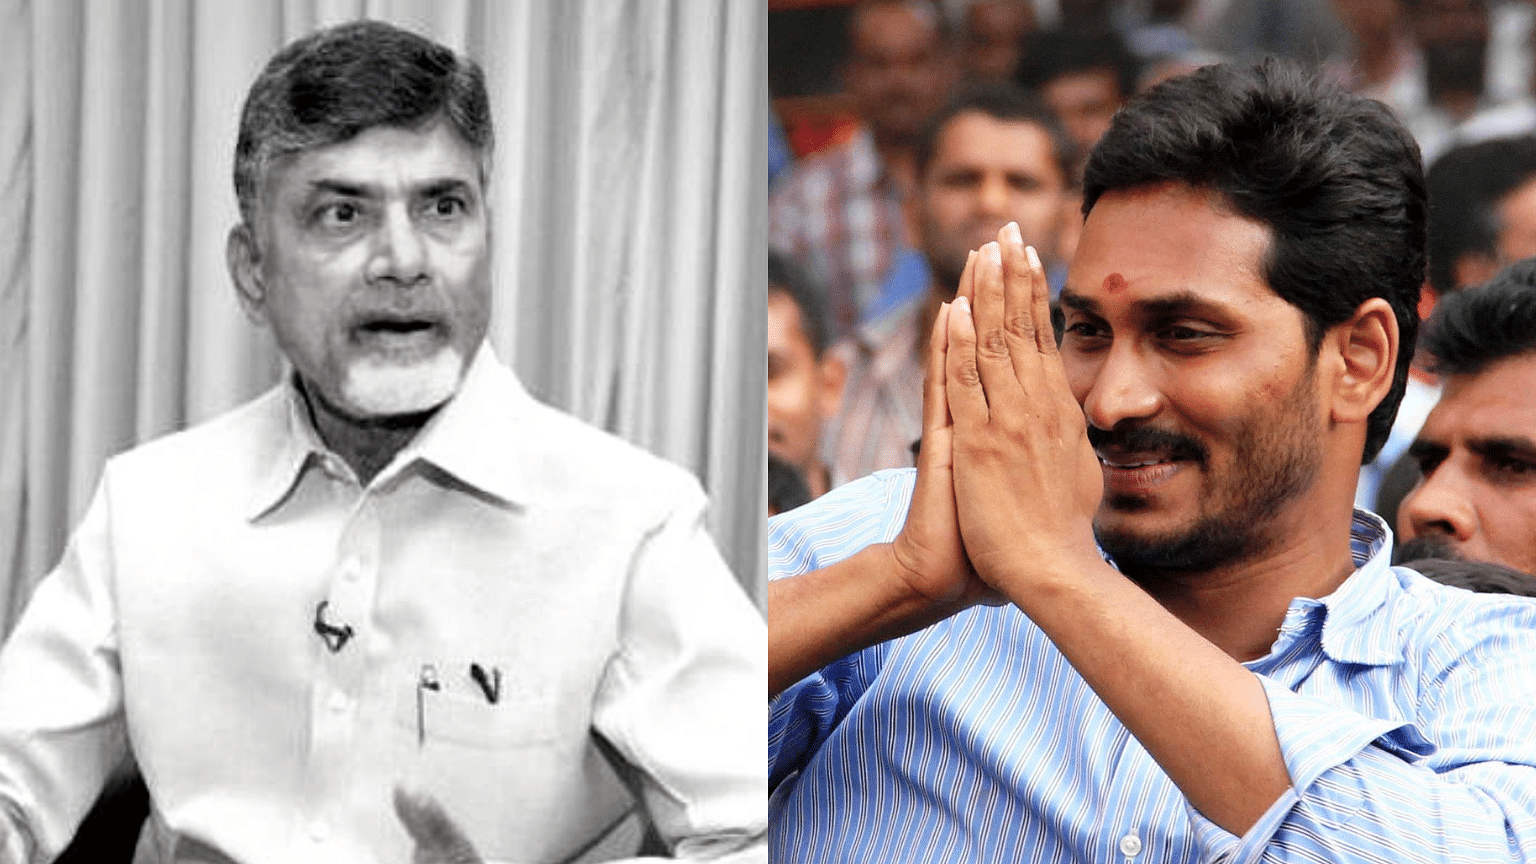 YSRC chief Jagan Mohan Reddy is set to become the next Chief Minister of Andhra Pradesh.